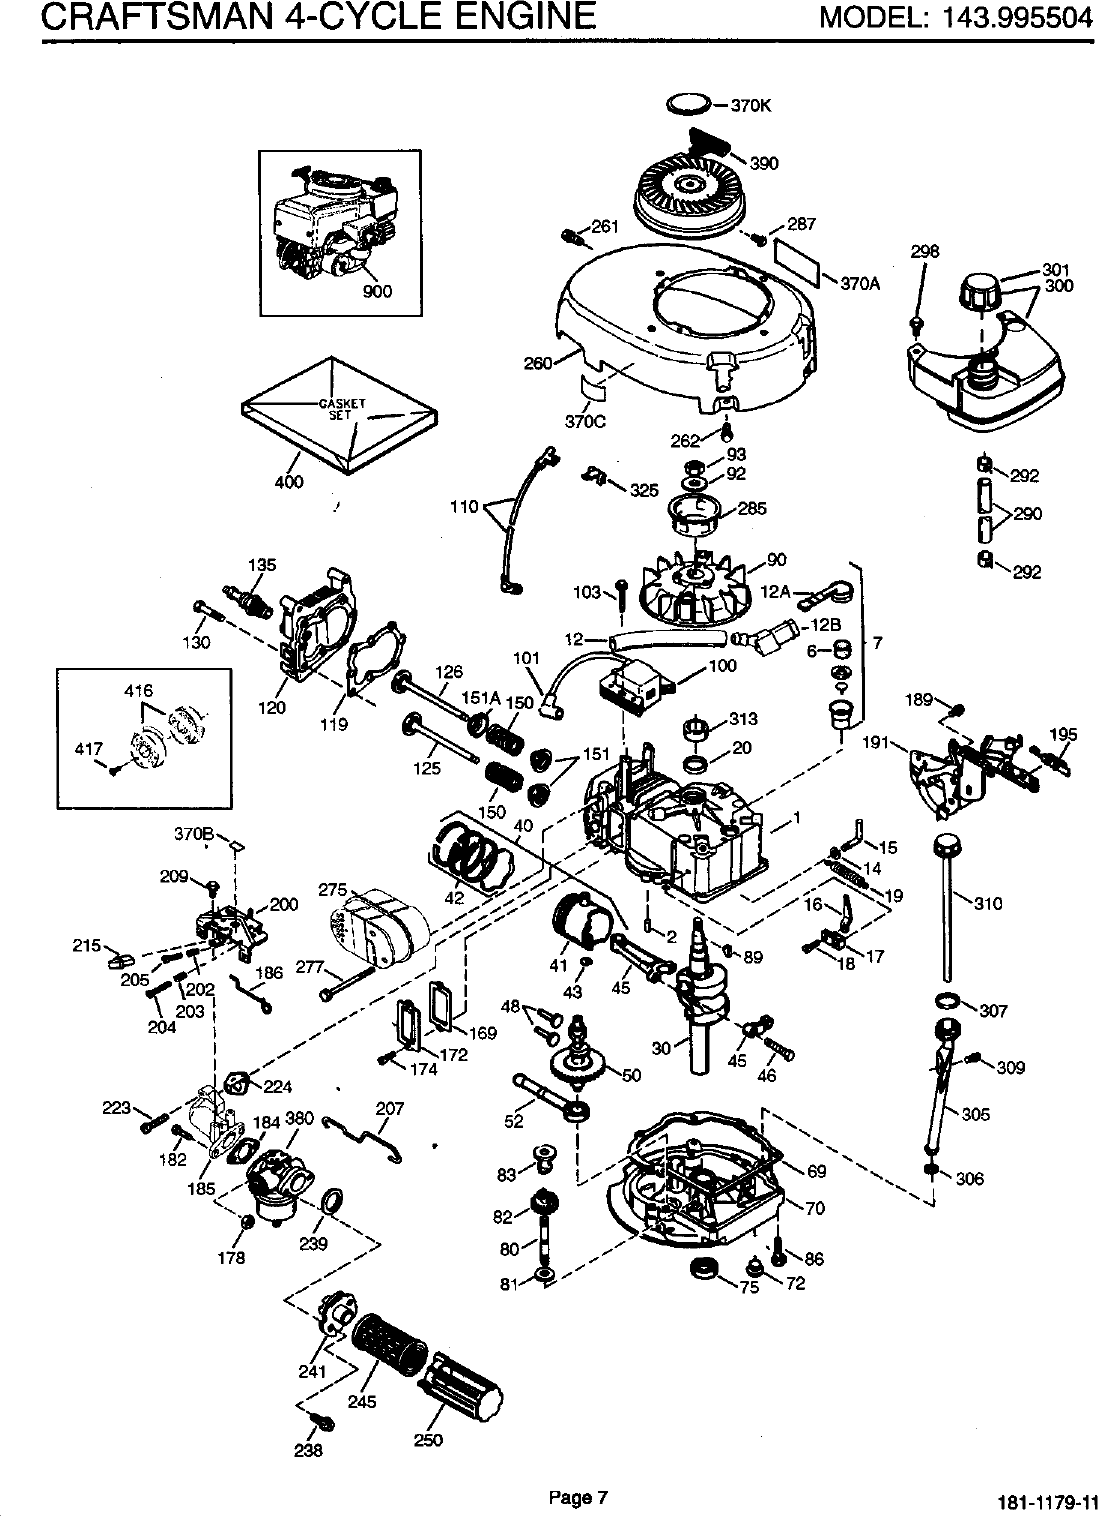 Page 8 of 12 - Craftsman 143995504 User Manual  SEARS SOLID STATE IGINITION ENGINE - Manuals And Guides L9050367